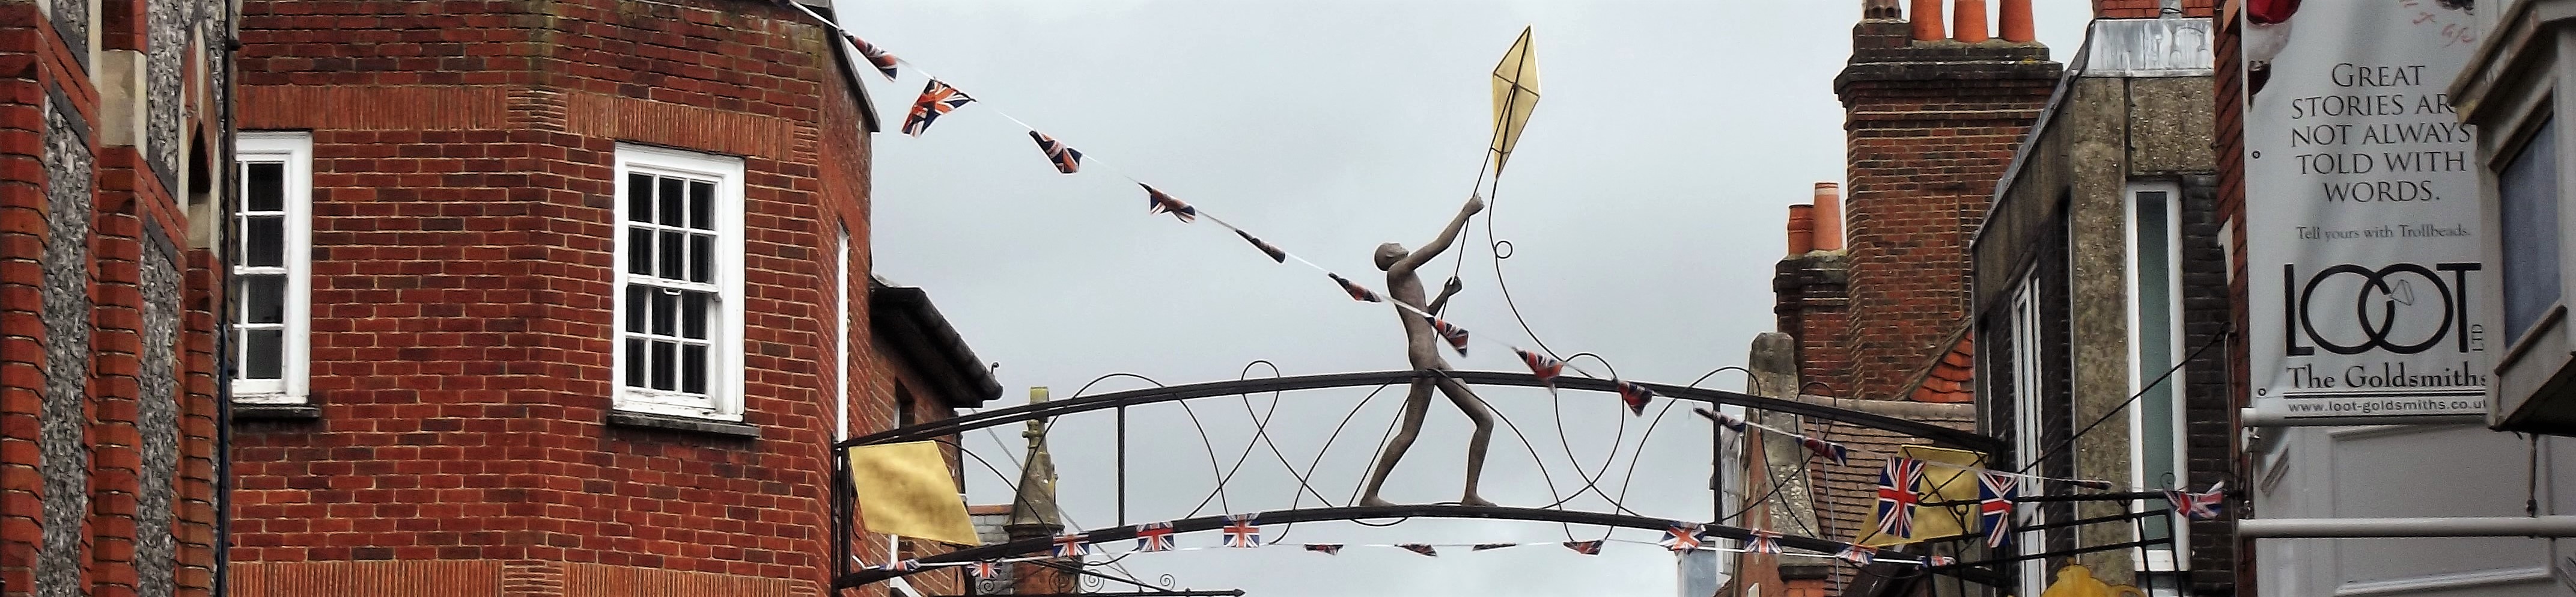 Winchester's Parchment Street is home to the city'sÂ famous landmark, the Kite Flyer, created by sculptor Marzia Colonna which stands nearly nearlyÂ six metres high.